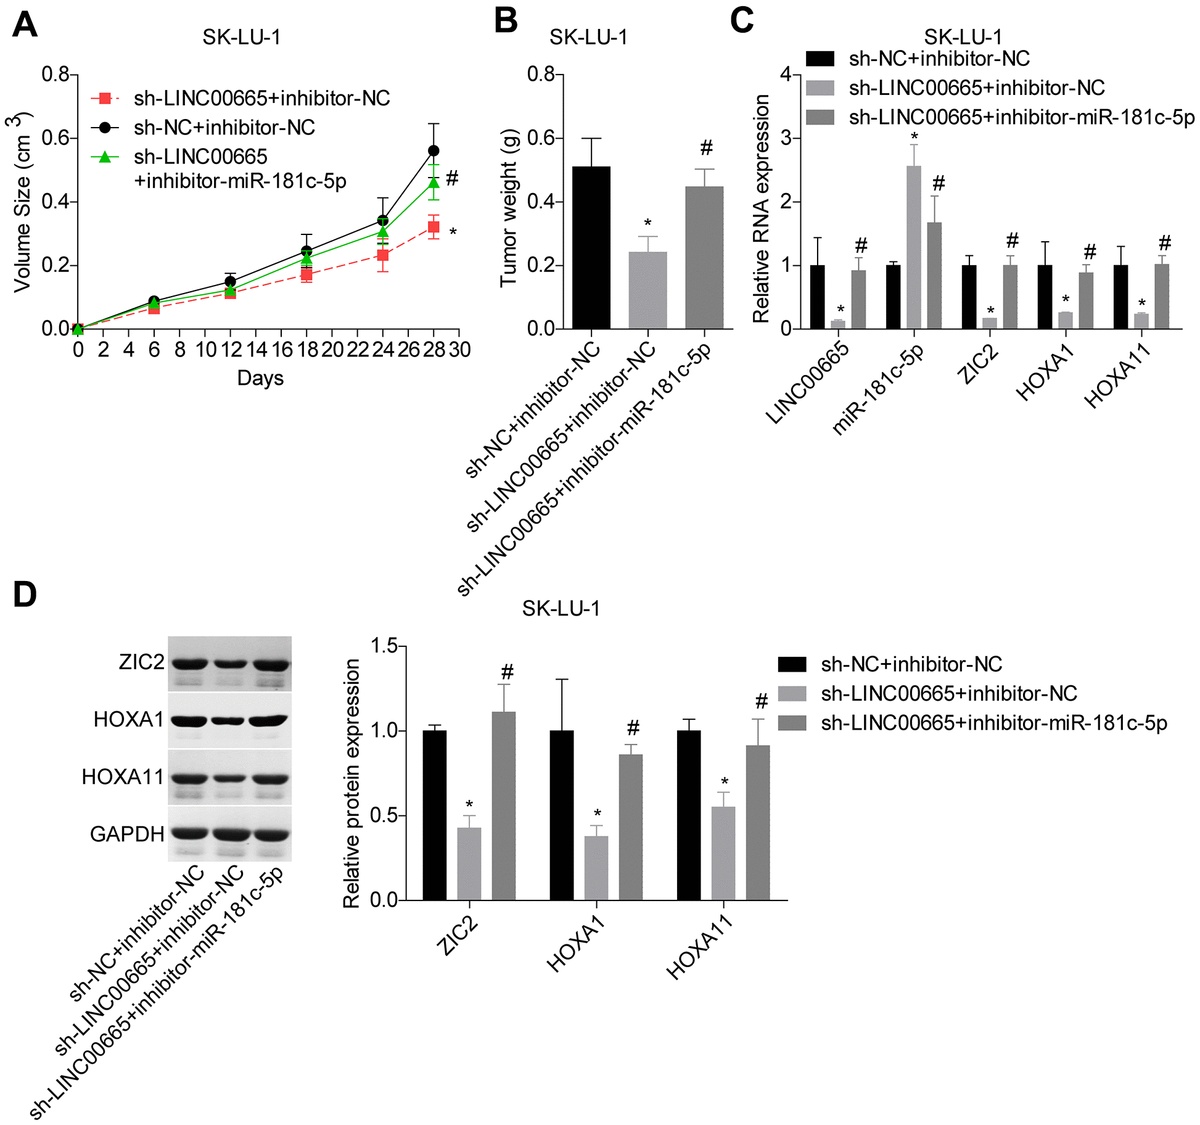 LINC00665 downregulation repressed tumor growth via regulating miR-181c-5p/ZIC2. (A, B) Tumor-bearing mice were constructed to assess the tumorigenesis of SK-LU-1 cells with sh-NC+inhibitor-NC, sh-LINC00665+inhibitor-NC or sh-LINC00665+inhibitor-miR-181c-5p stable transfection. (C) RT-PCR technology was applied to test the mRNA levels of LINC00665, miR-181c-5p, ZIC2, HOXA1 and HOX11 in tumors. (D) The protein levels of ZIC2, HOXA1 and HOXA11 in mouse tumor tissues were determined by western blotting assay. (*p0.05, vs. inhibitor-NC+sh-NC group; #p0.05, vs. inhibitor-miR-181c-5p+sh-NC group).